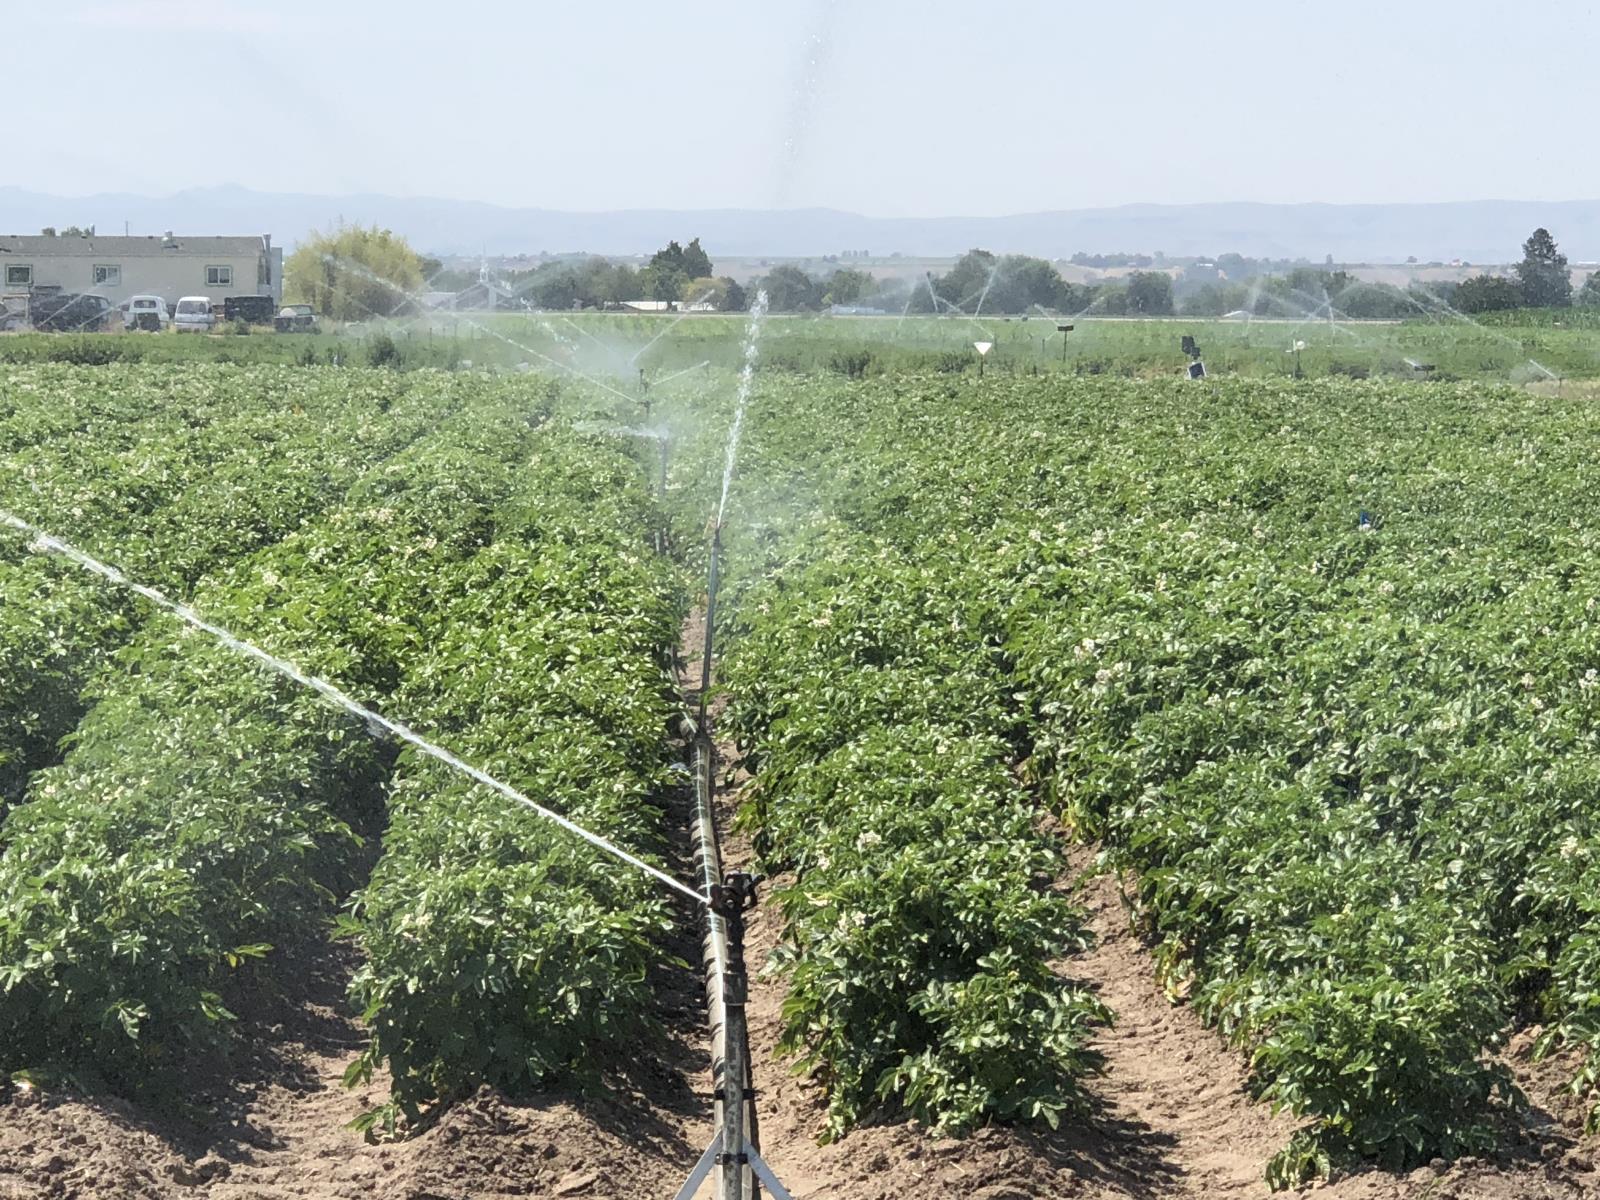 A potato field near Parma is watered in early July. Members of the Idaho Water Resource Board are encouraging all Idahoans, farmers as well as urban folks, to conserve as much water as they can during this drought year. 